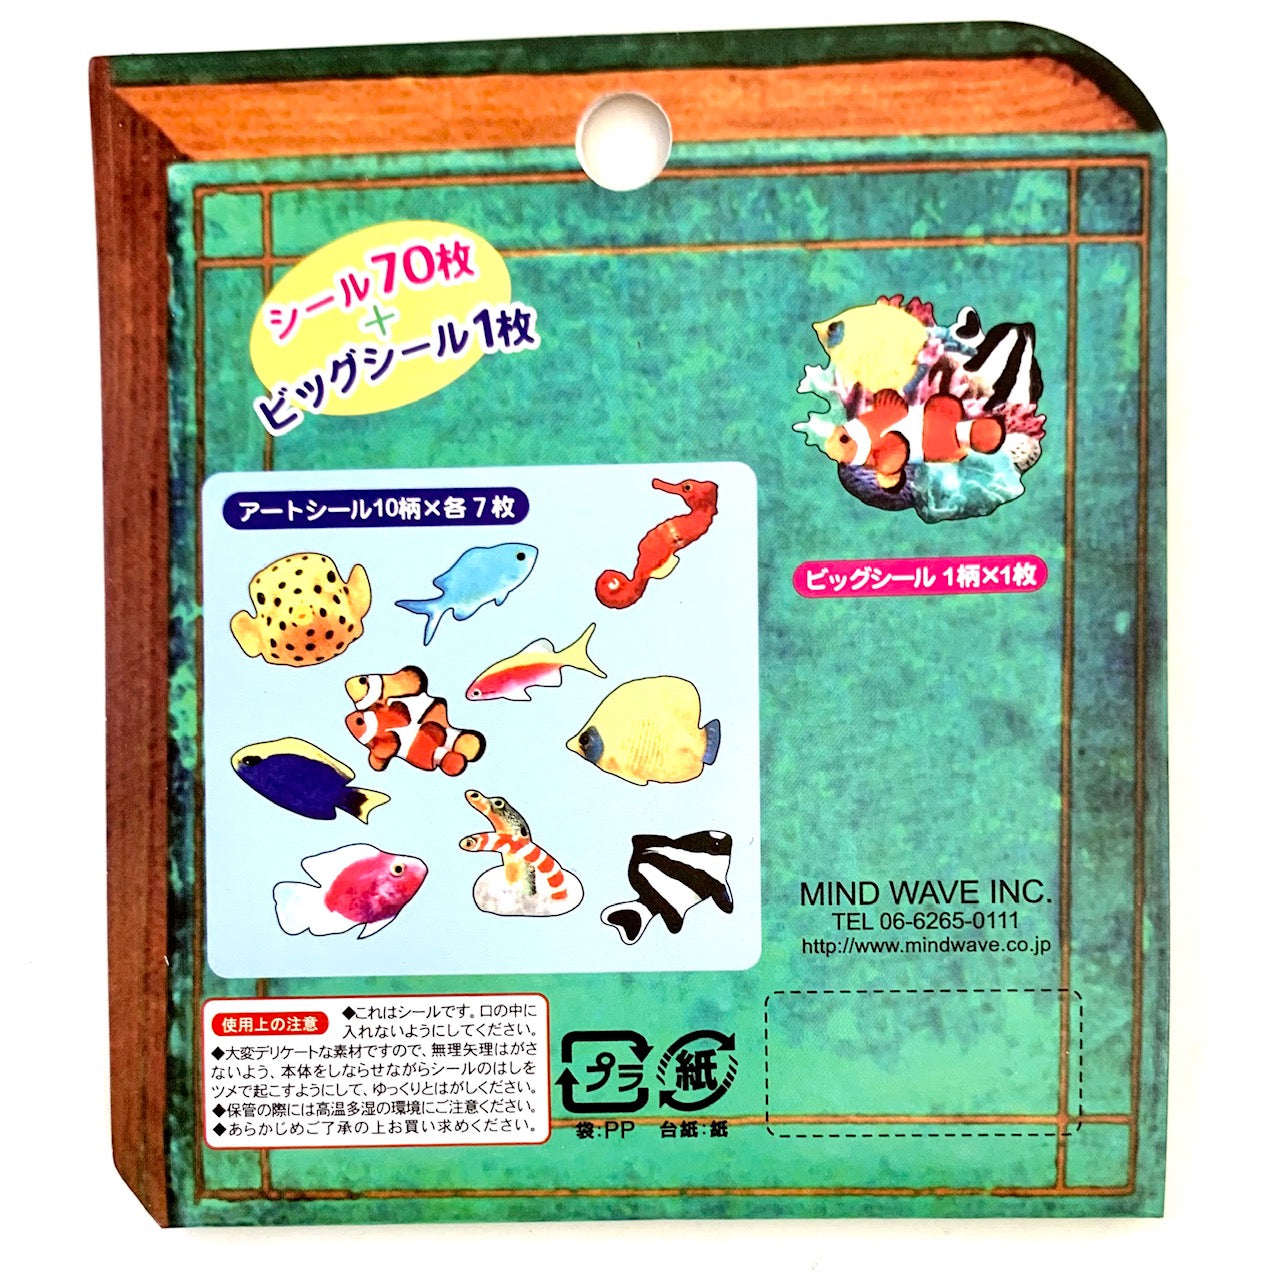 X 75927 Tropical Fish 70 stickers in a bag-DISCONTINUED